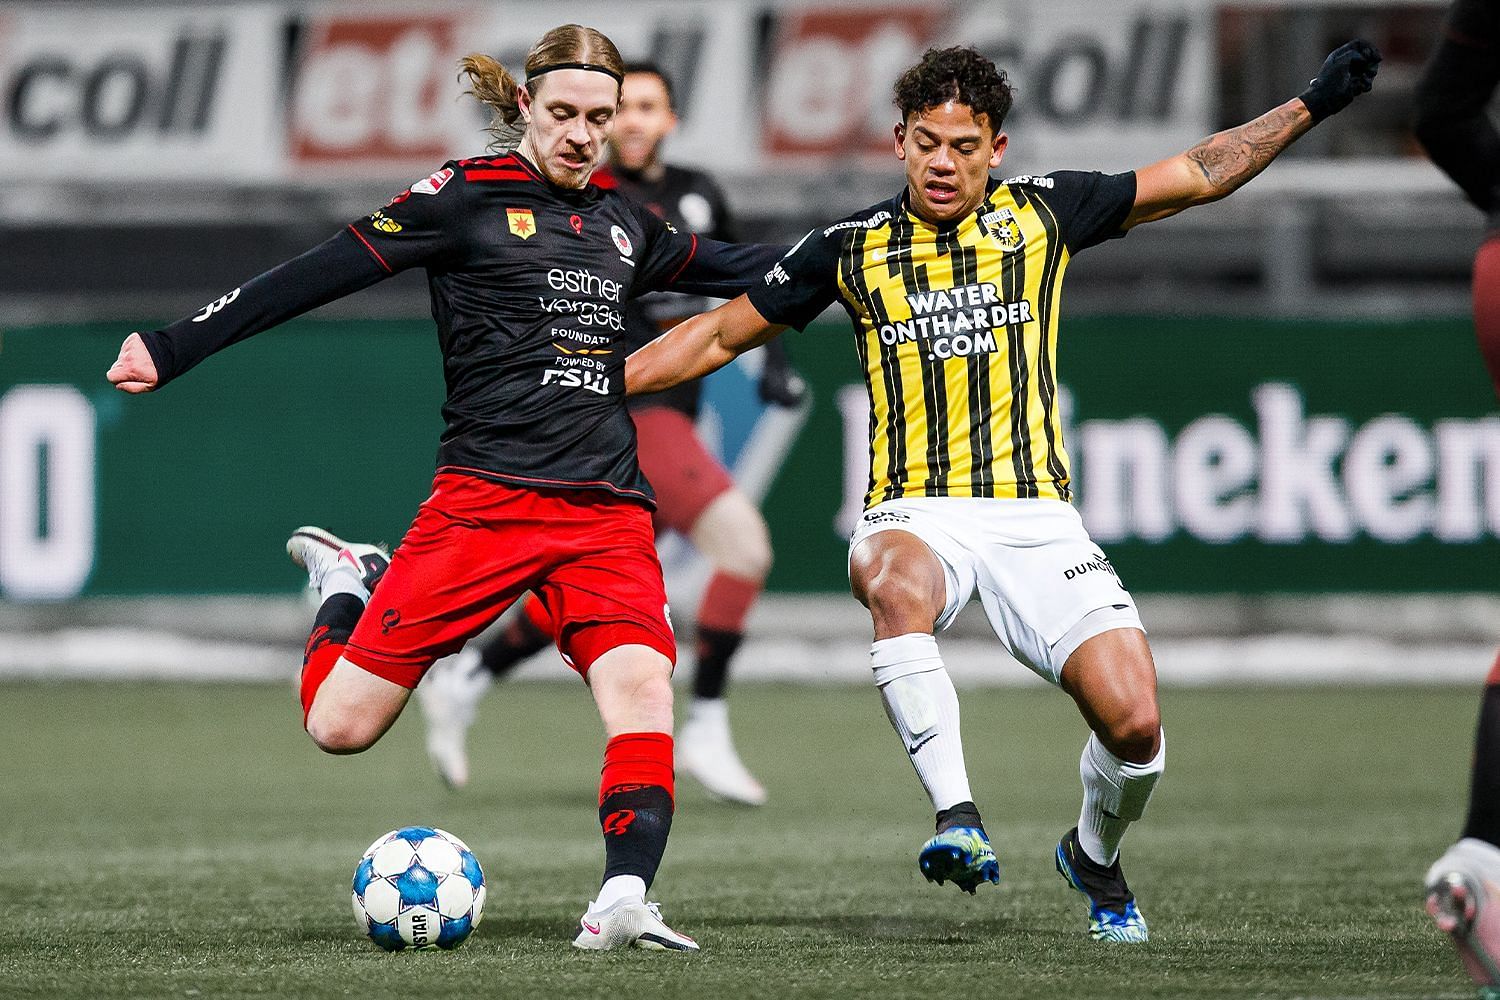 This will be the 50th encounter between Vitesse and Excelsior 